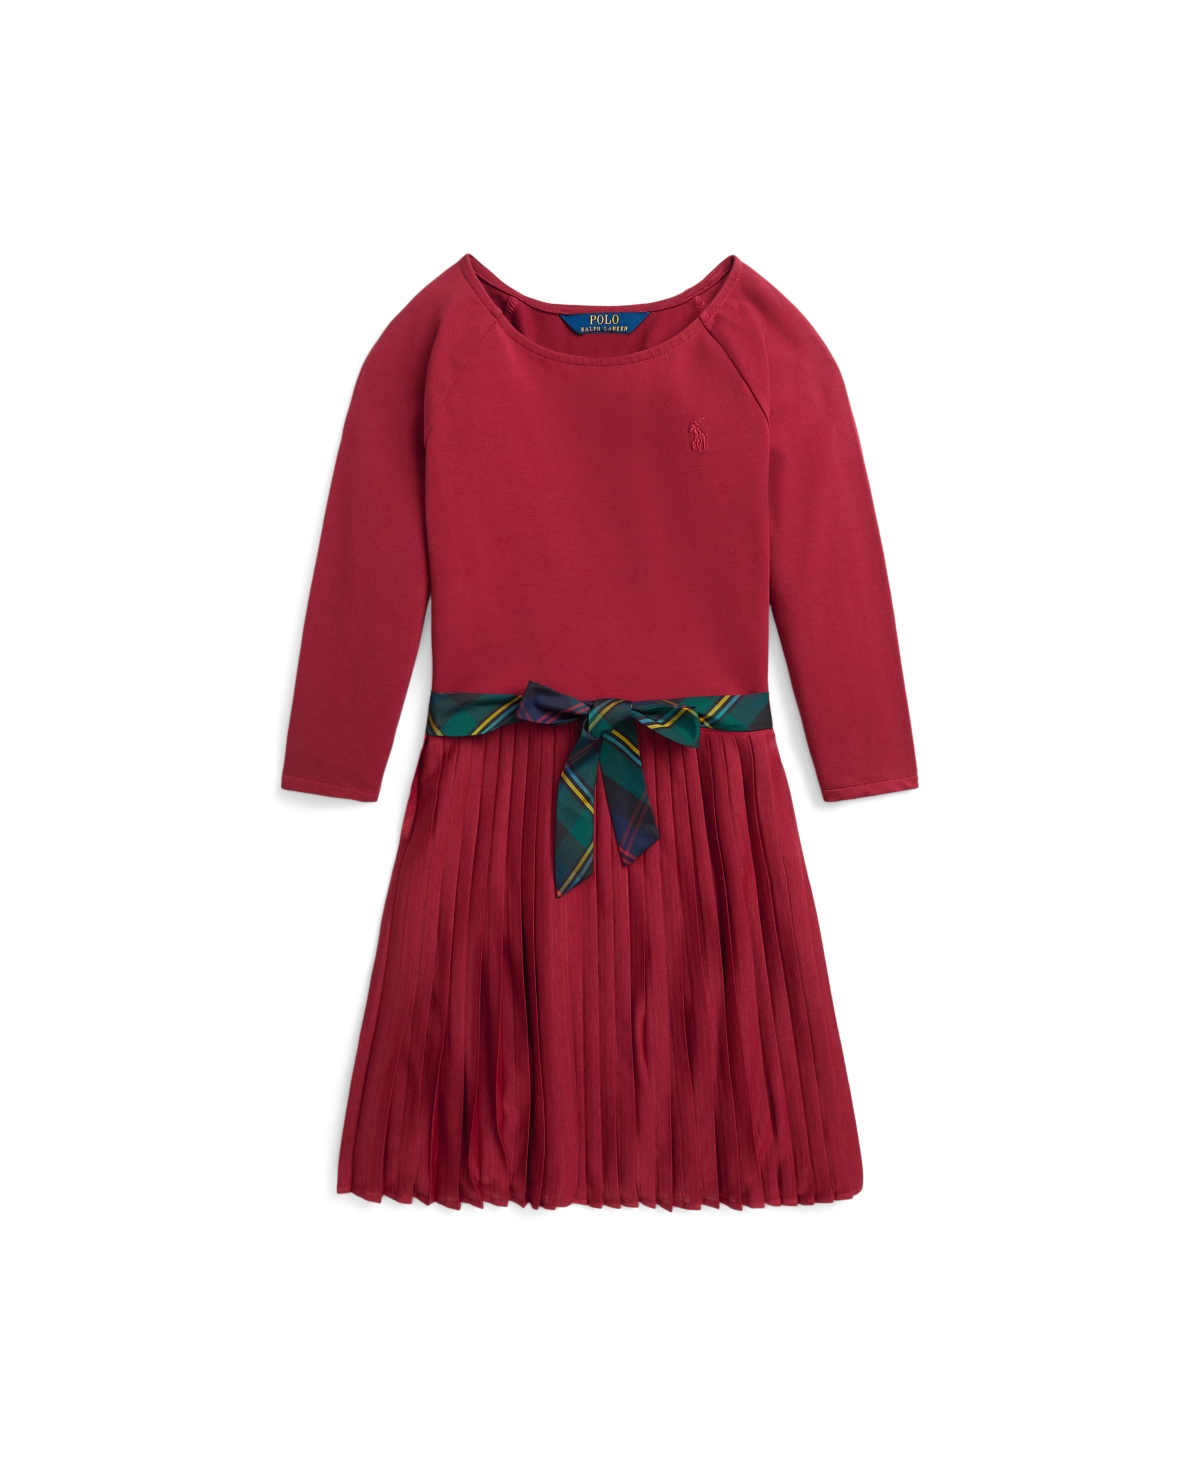 Polo Ralph Lauren Kids' Big Girls Pleated Stretch Jersey Dress In Holiday Red